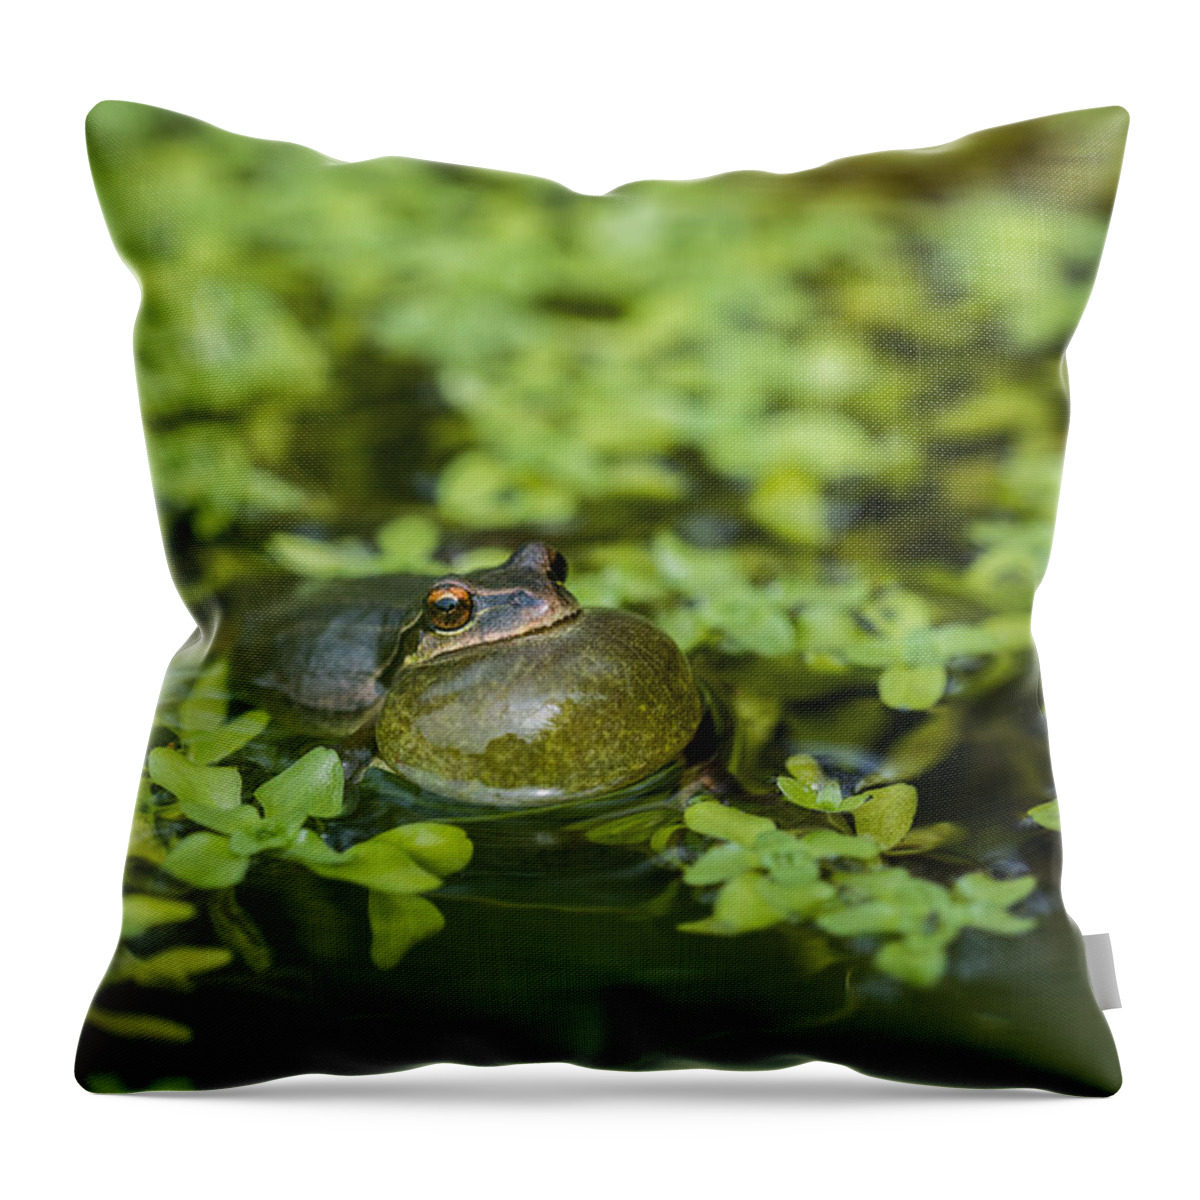 Courtship Throw Pillow featuring the photograph Calling Treefrog by Robert Potts